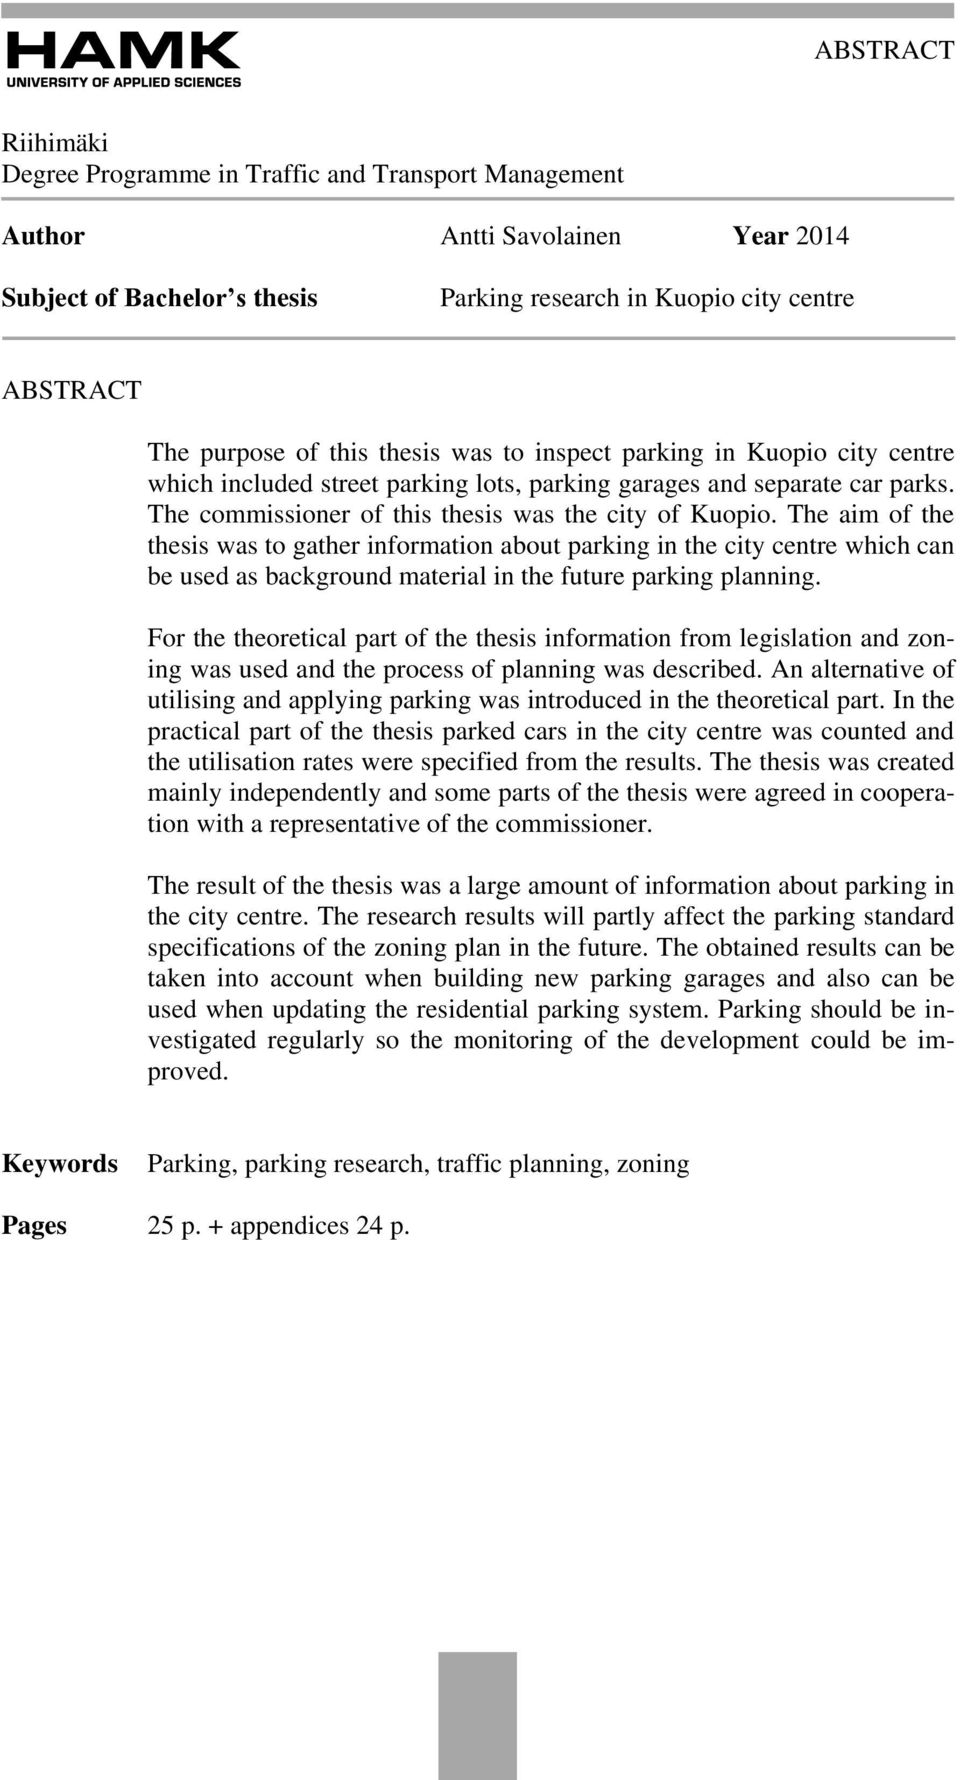 The aim of the thesis was to gather information about parking in the city centre which can be used as background material in the future parking planning.